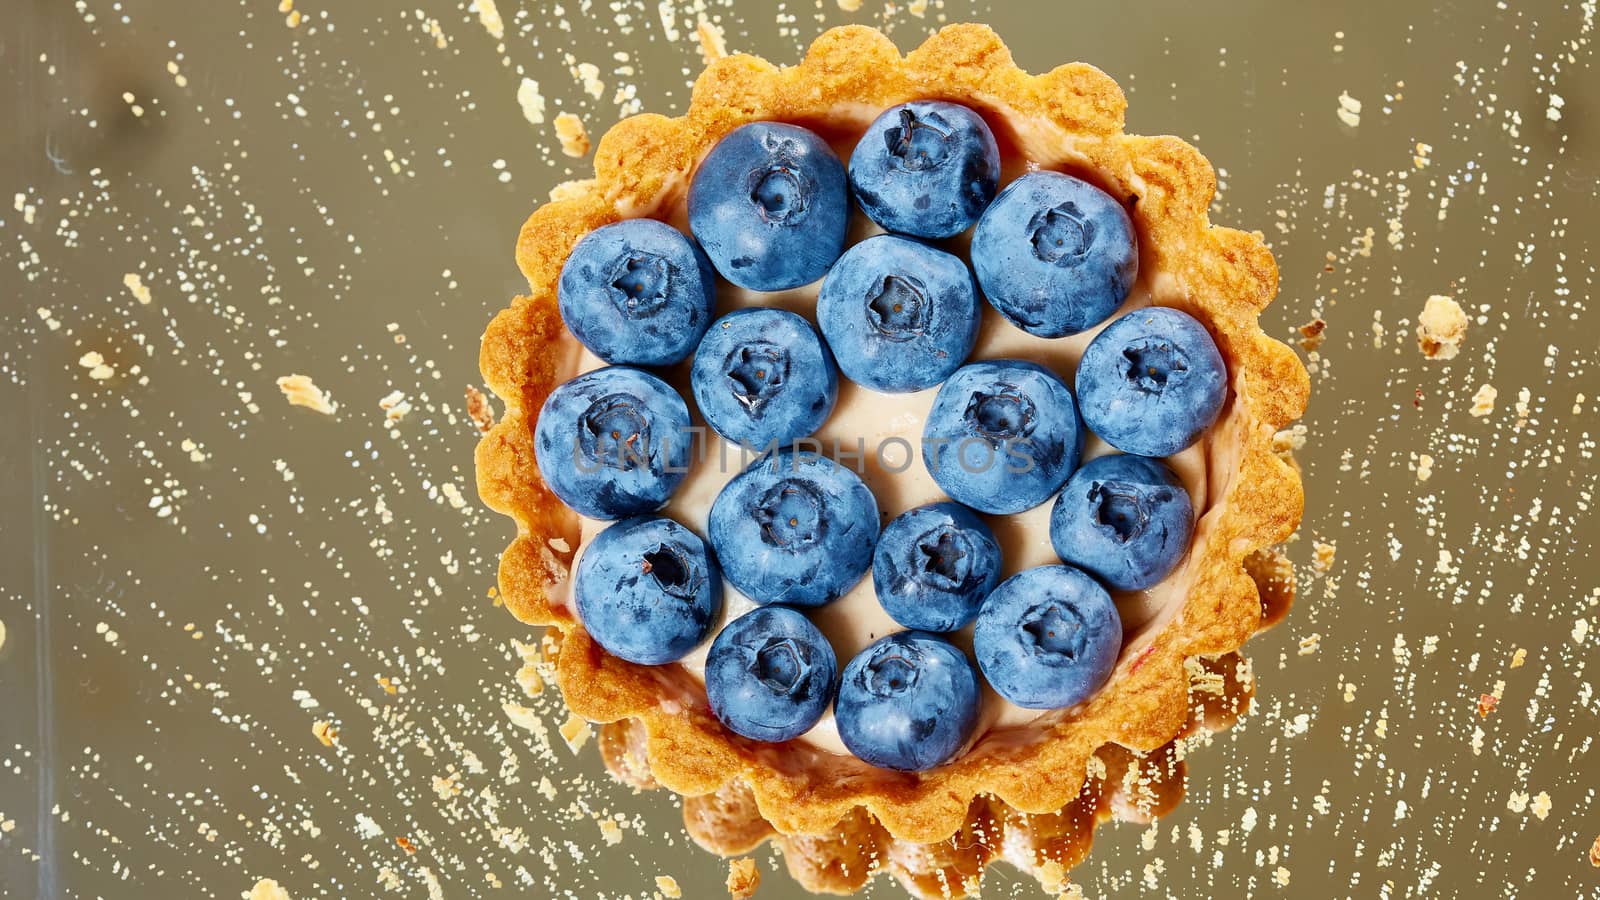 Tartlet with fresh blueberries. Background with copy space.